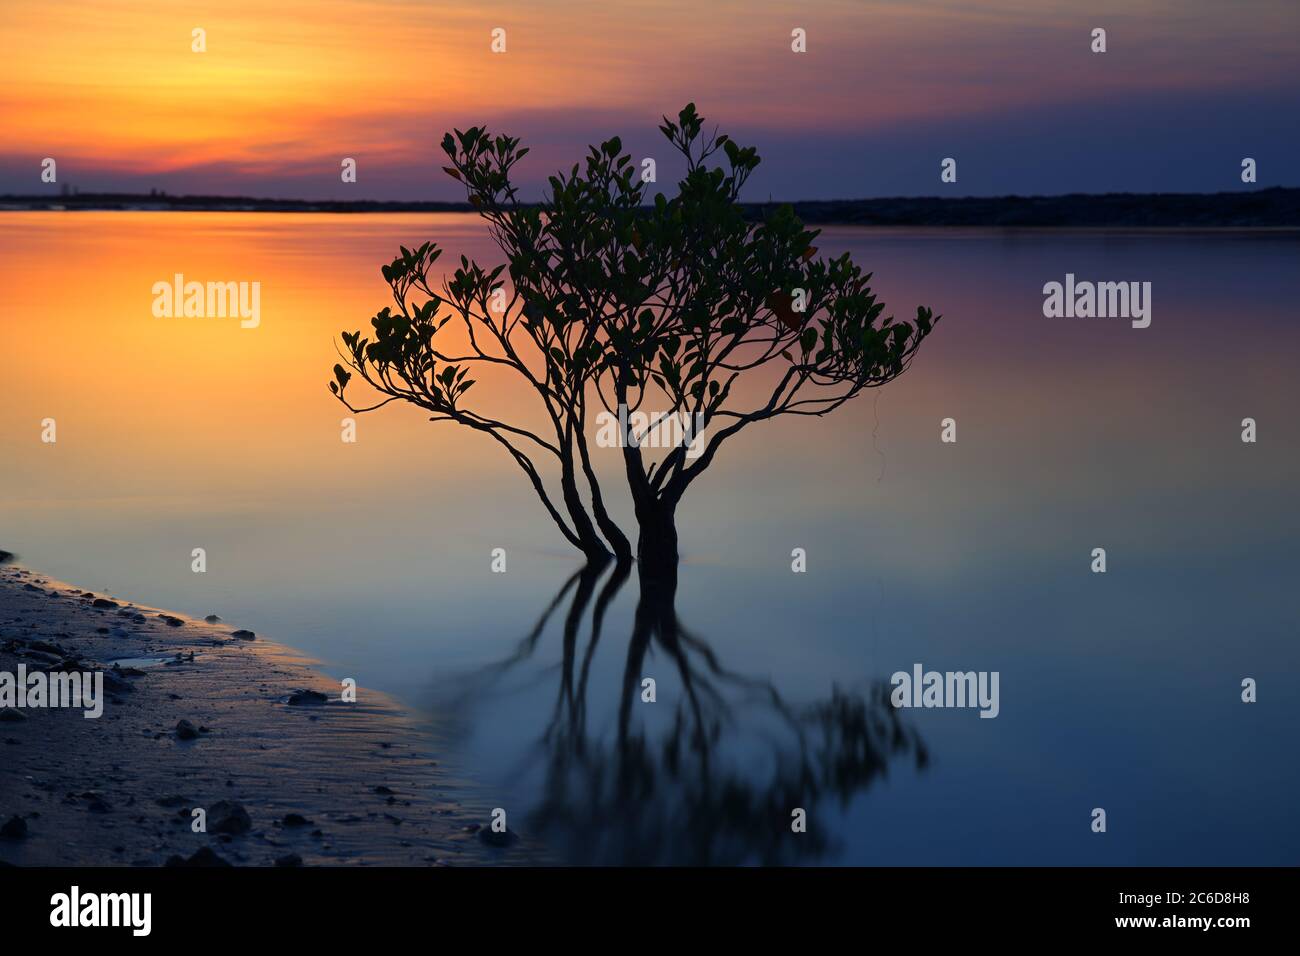 Mangrove tree in the river at sunset Stock Photo